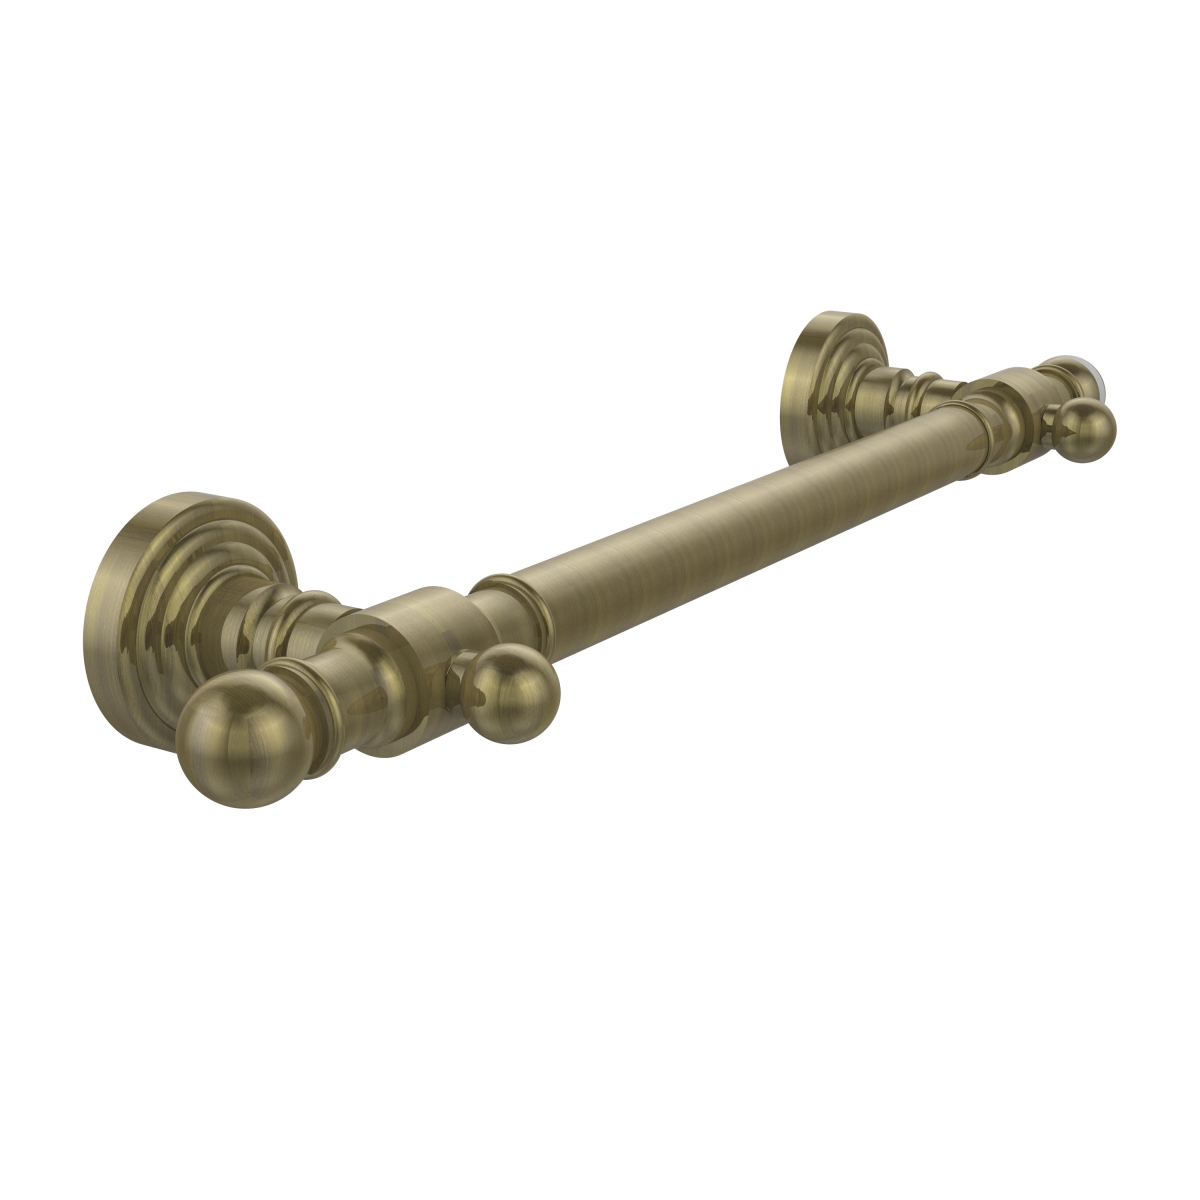 Picture of Allied Brass WP-GRS-36-ABR 36 in. Grab Bar Smooth, Antique Brass - 3.5 x 42 x 36 in.